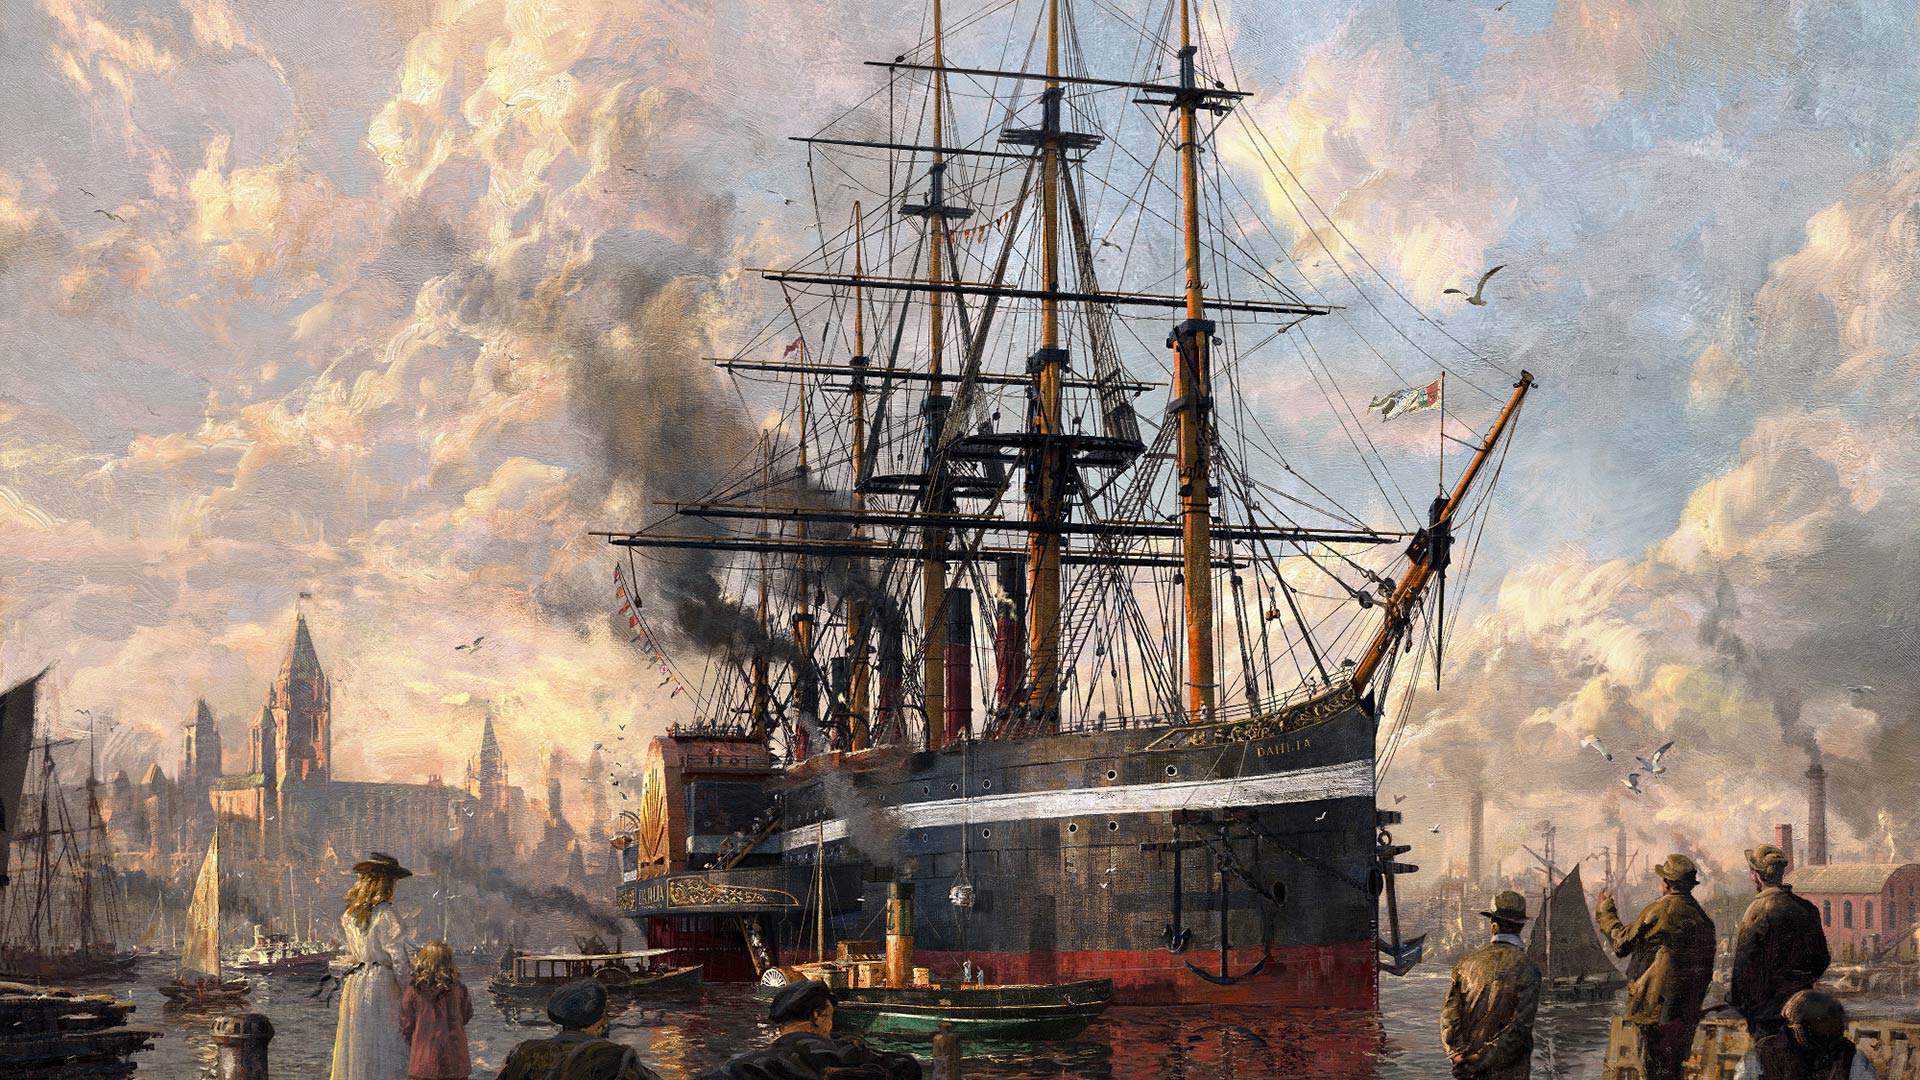 Anno 1800 Heading To Xbox PS5 March - On 16 And Gameranx X/S